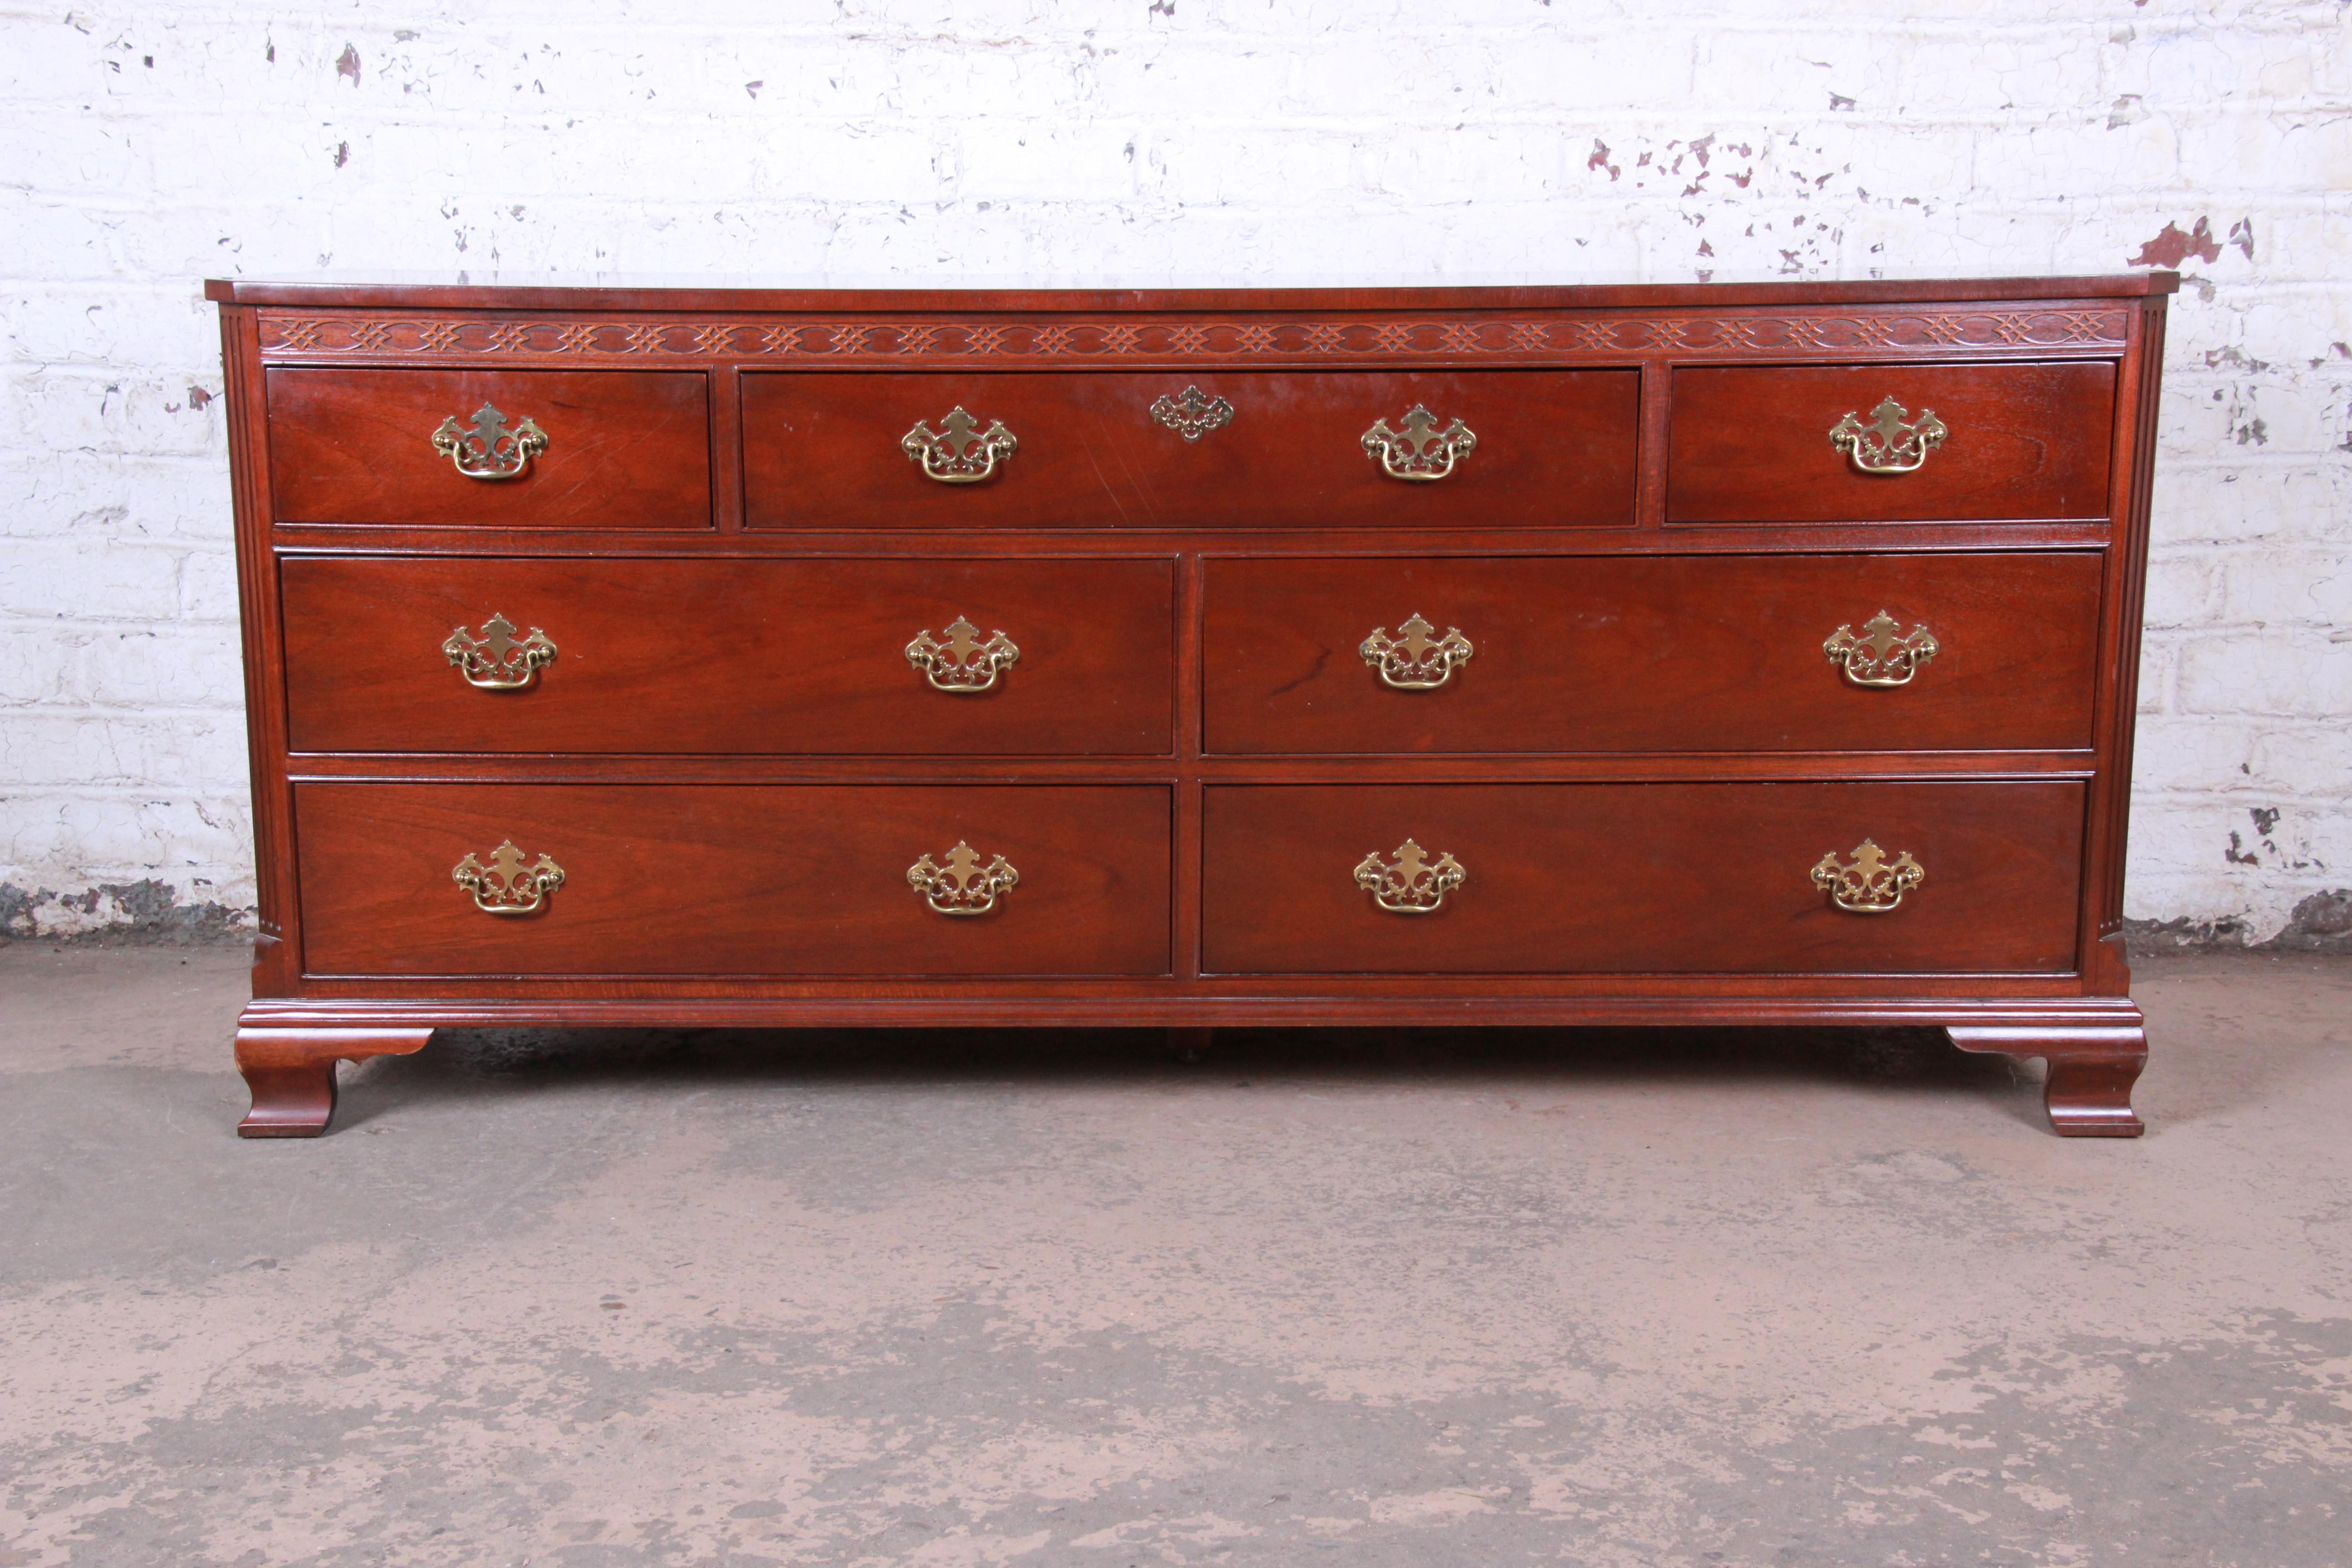 A gorgeous vintage Chippendale style mahogany long dresser by Baker Furniture. The dresser features stunning mahogany wood grain, with nice carved wood details and original brass hardware. It offers excellent storage, with seven deep dovetailed